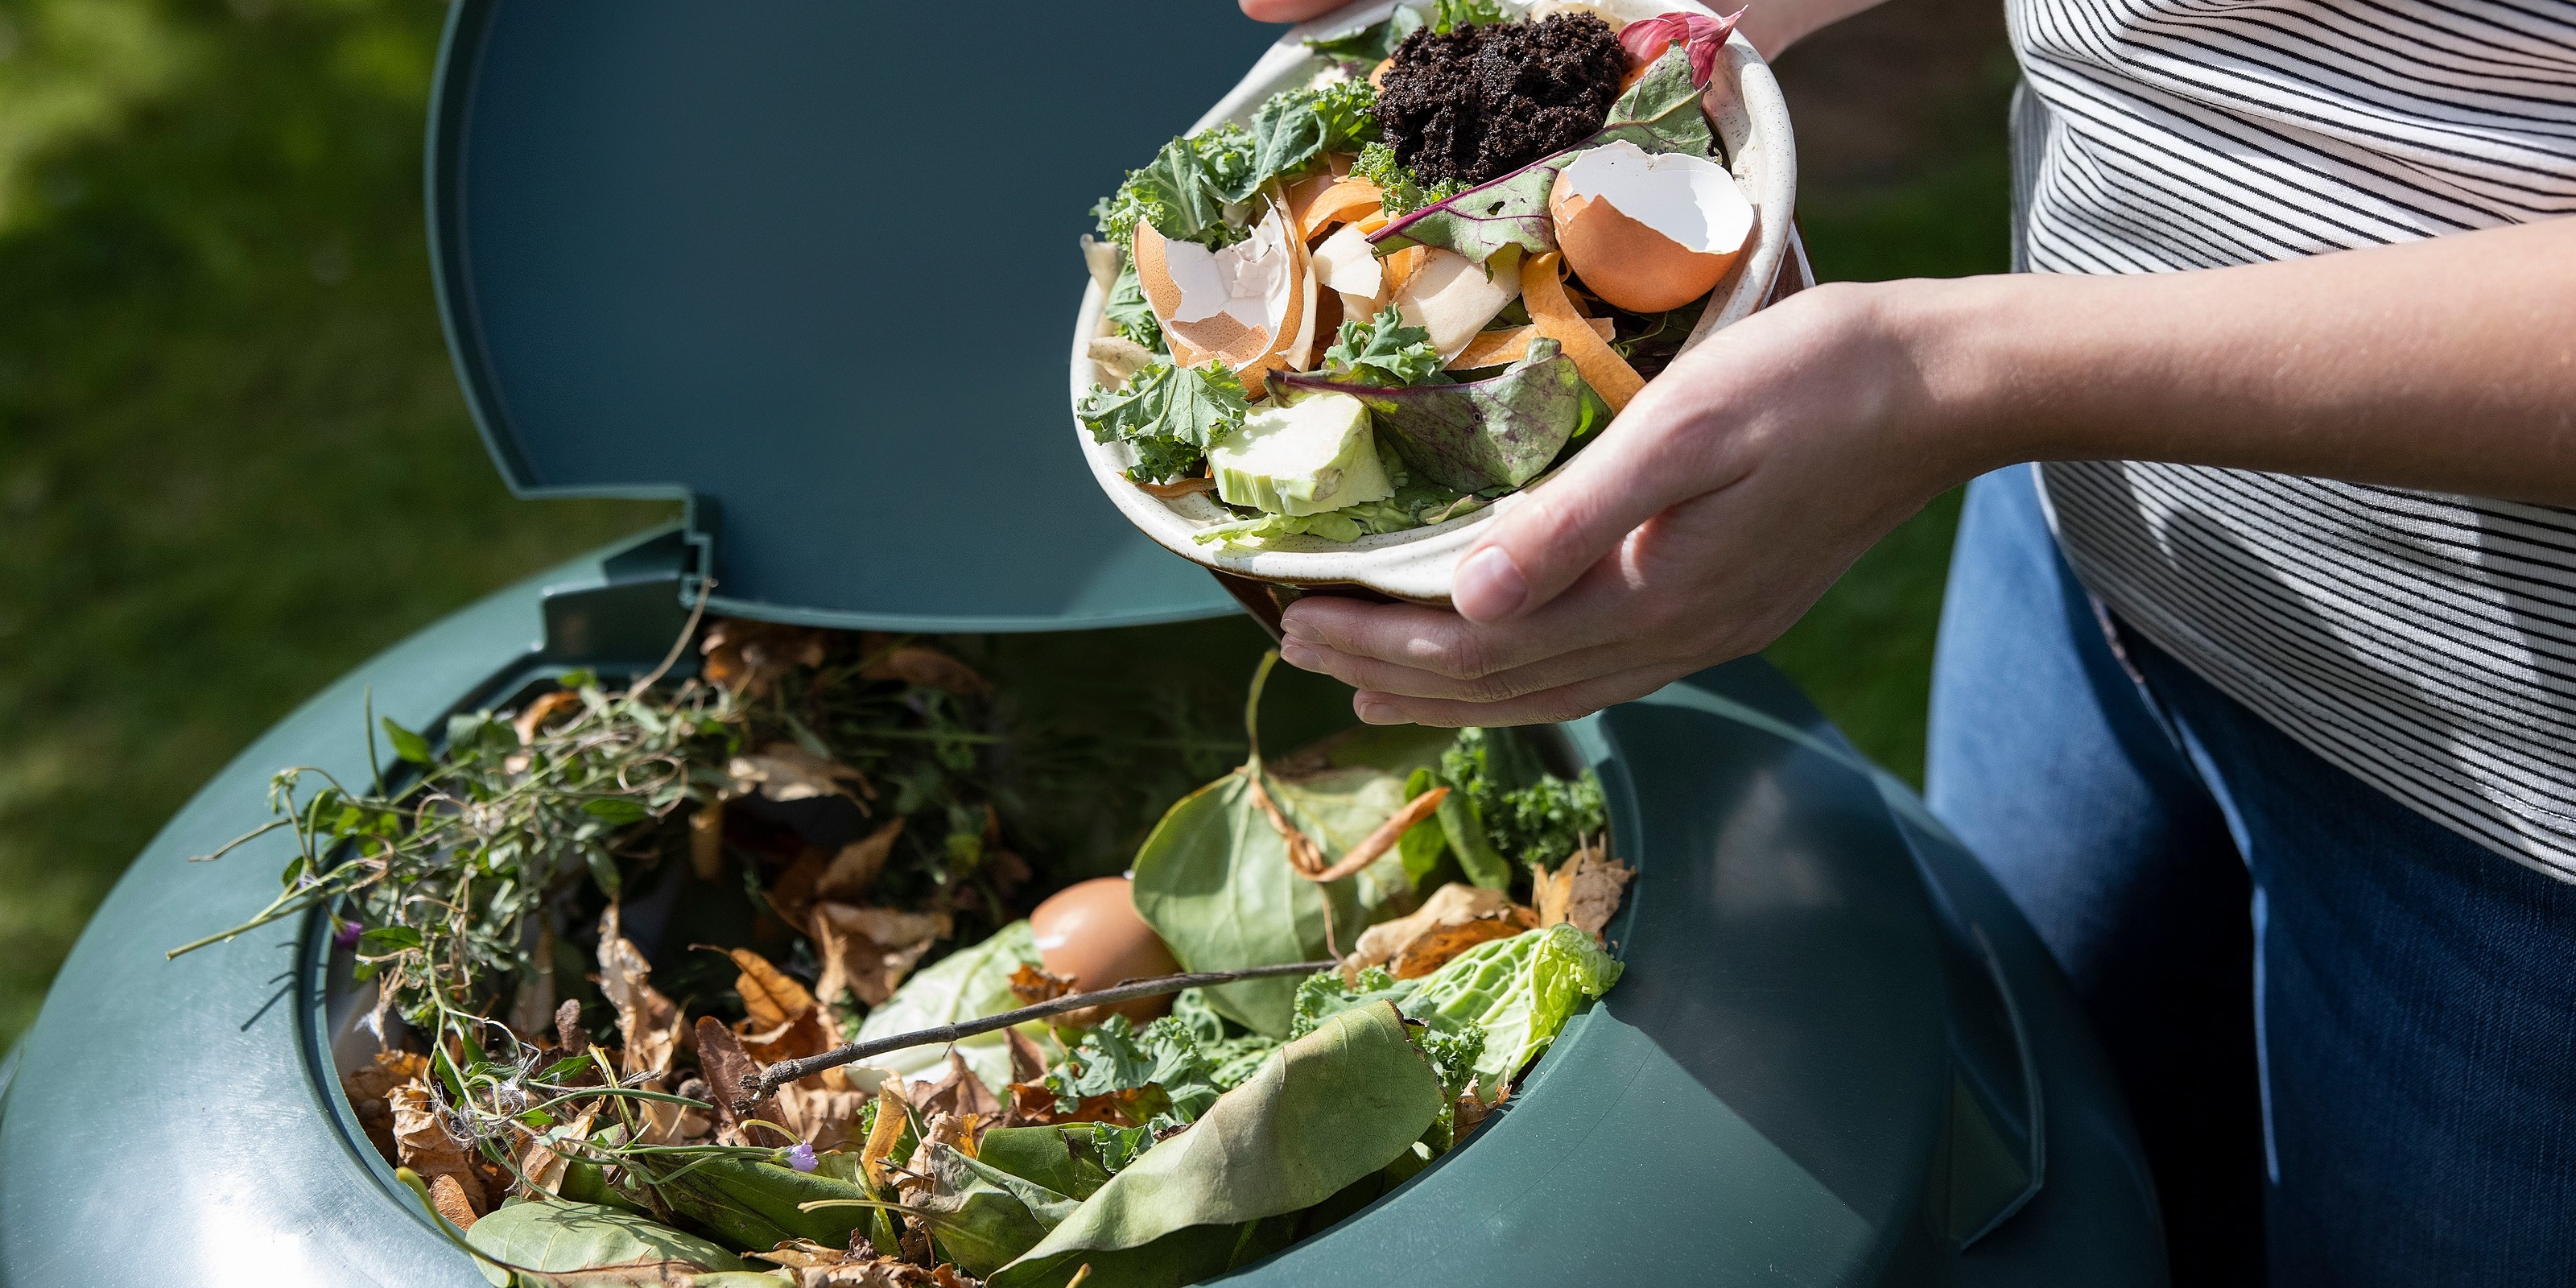 Composting at home with compost, worms and bokashi in Murrumbeena